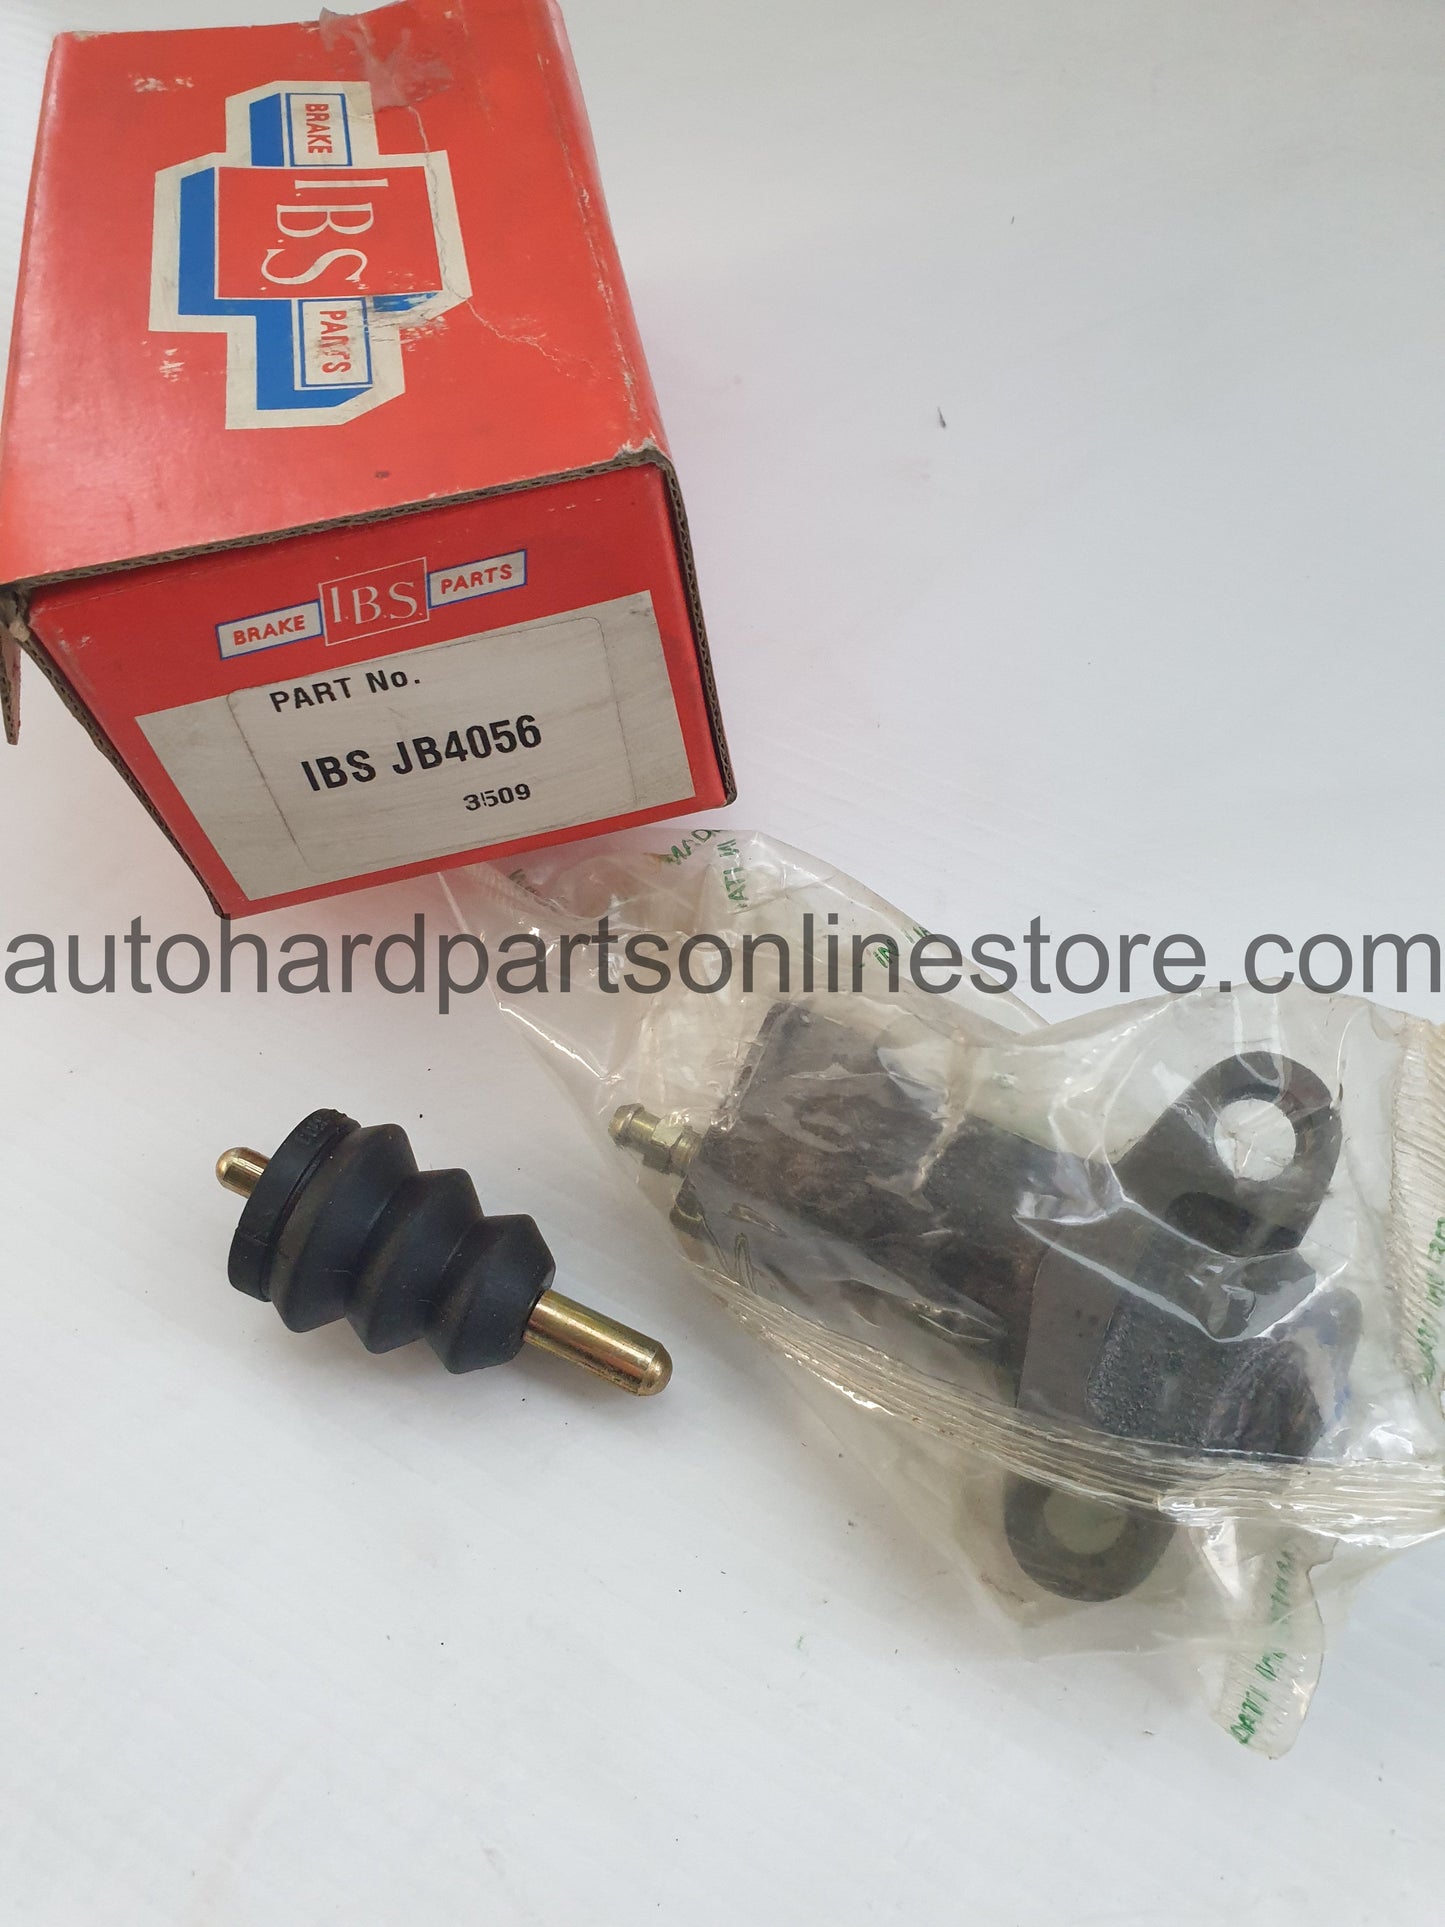 IBS clutch slave cylinder assembly